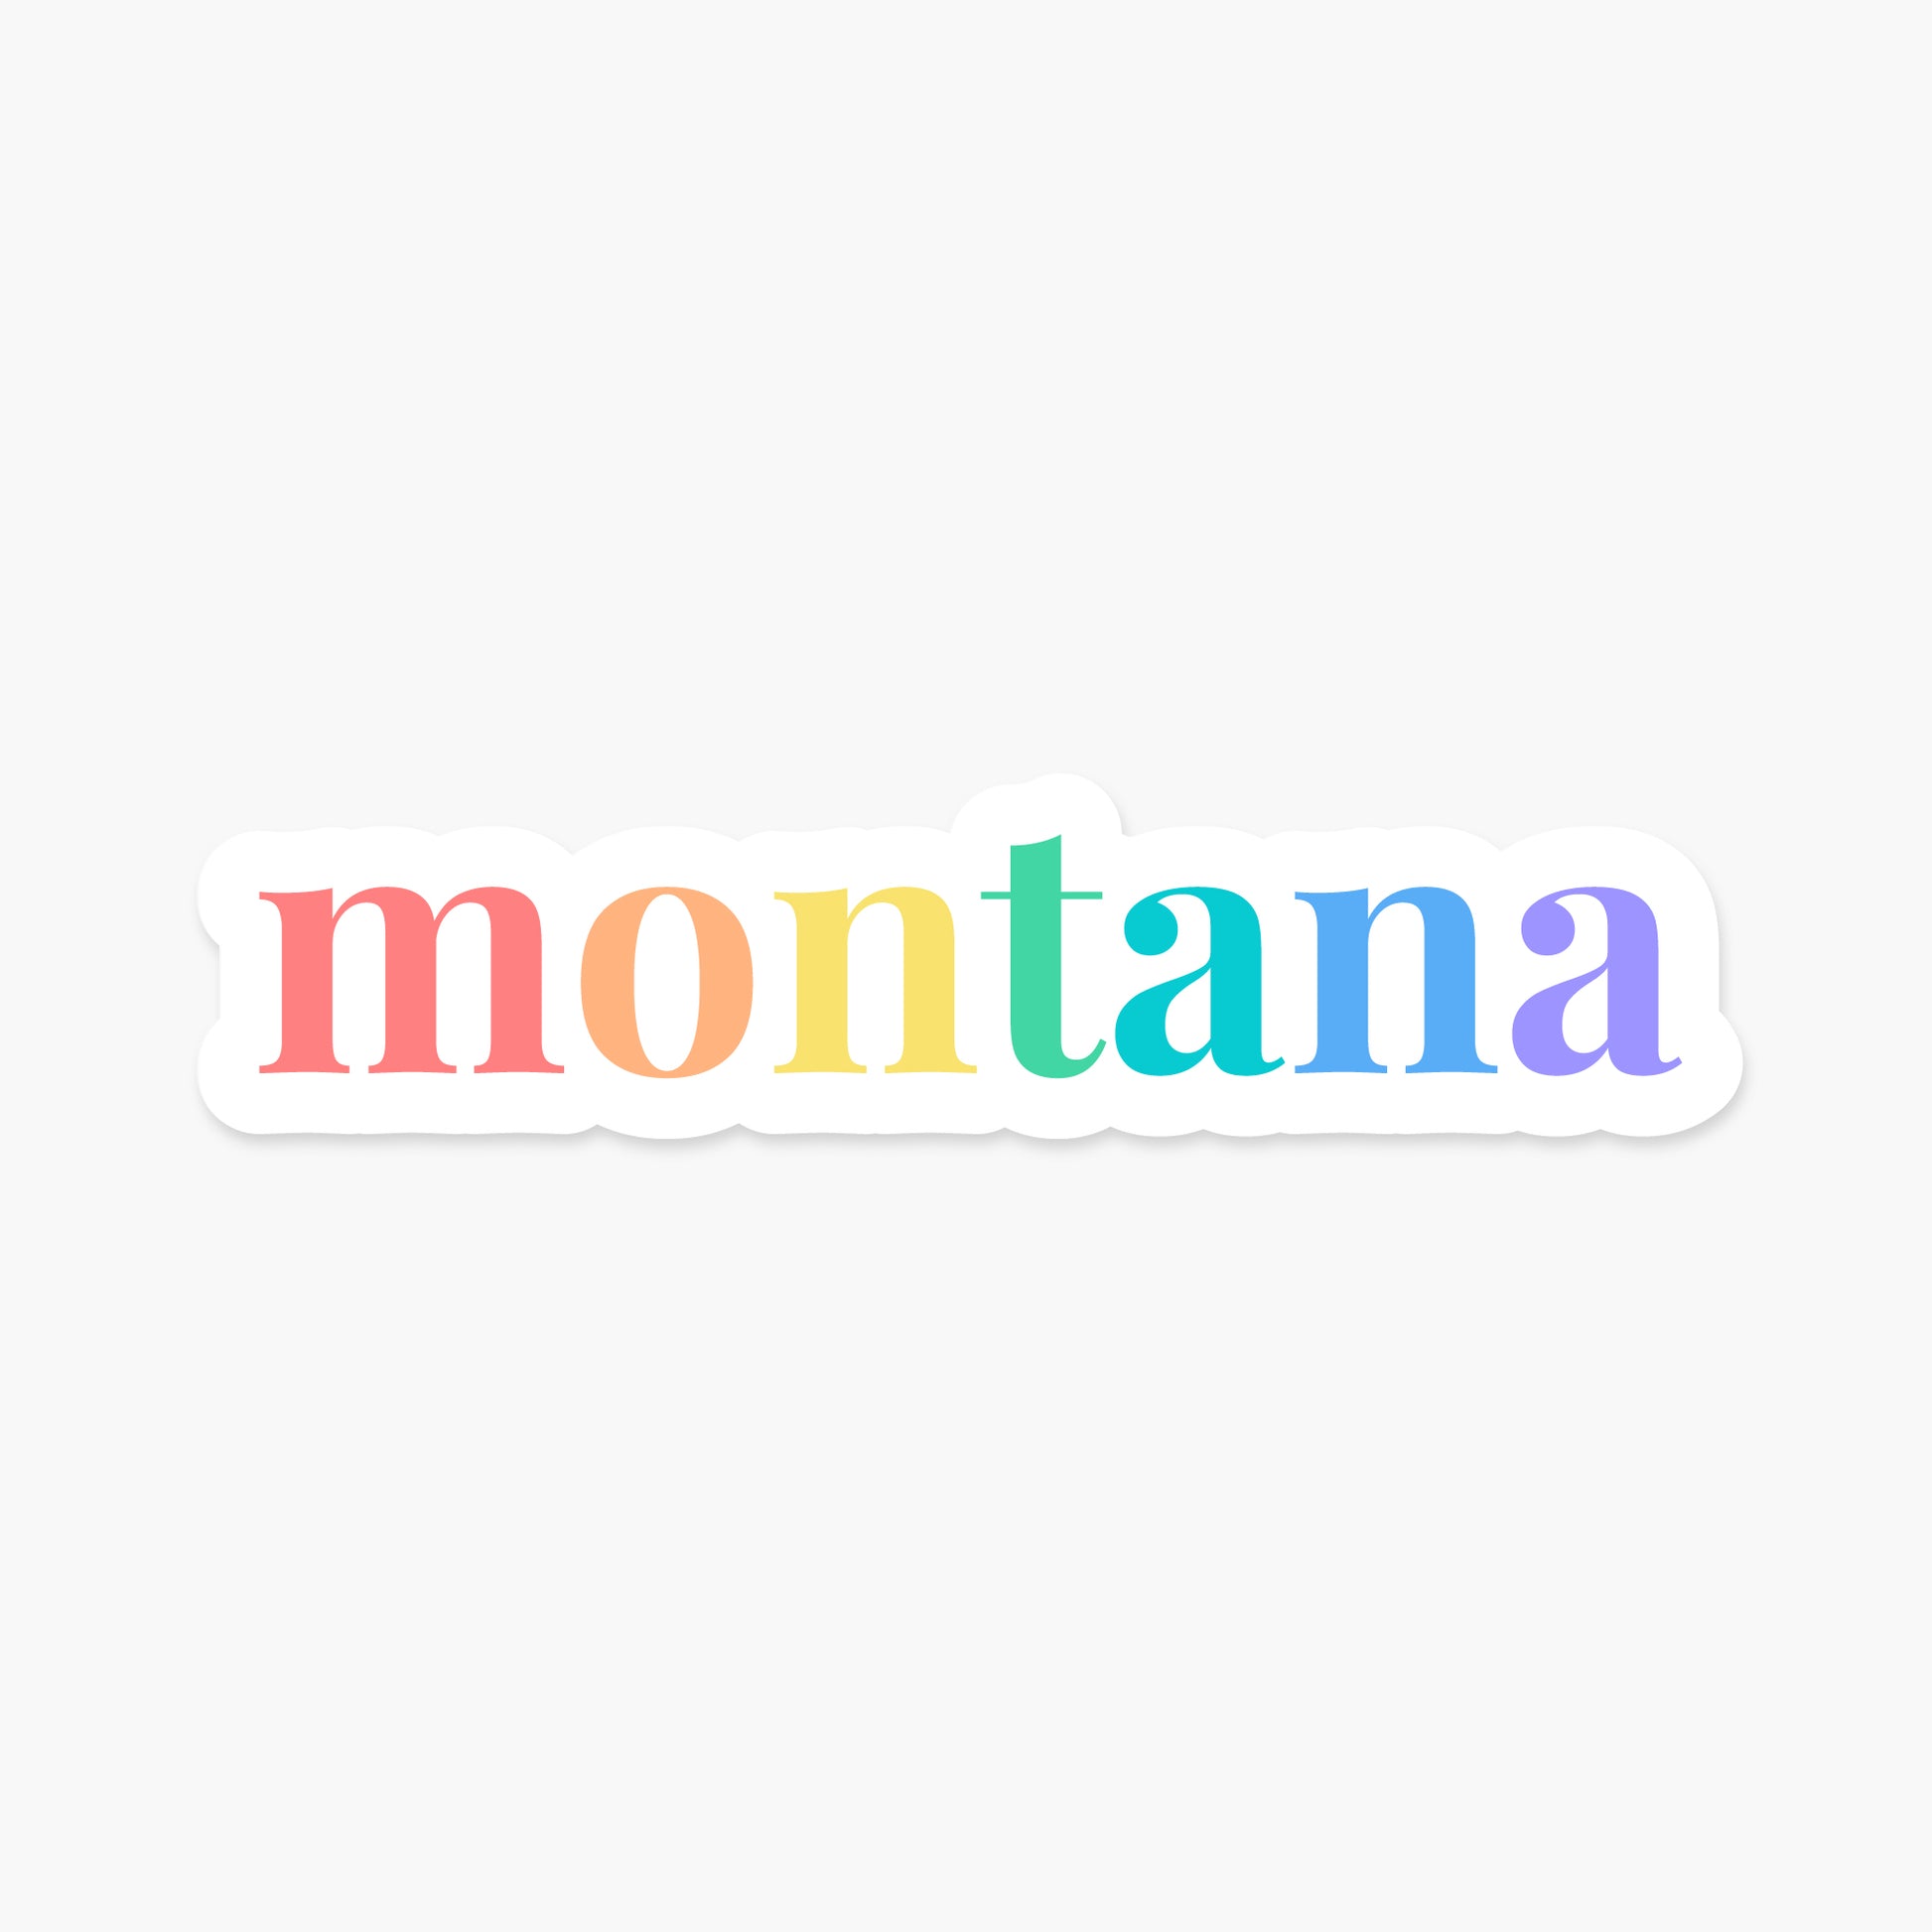 Montana US State - Everyday Sticker | Footnotes Paper